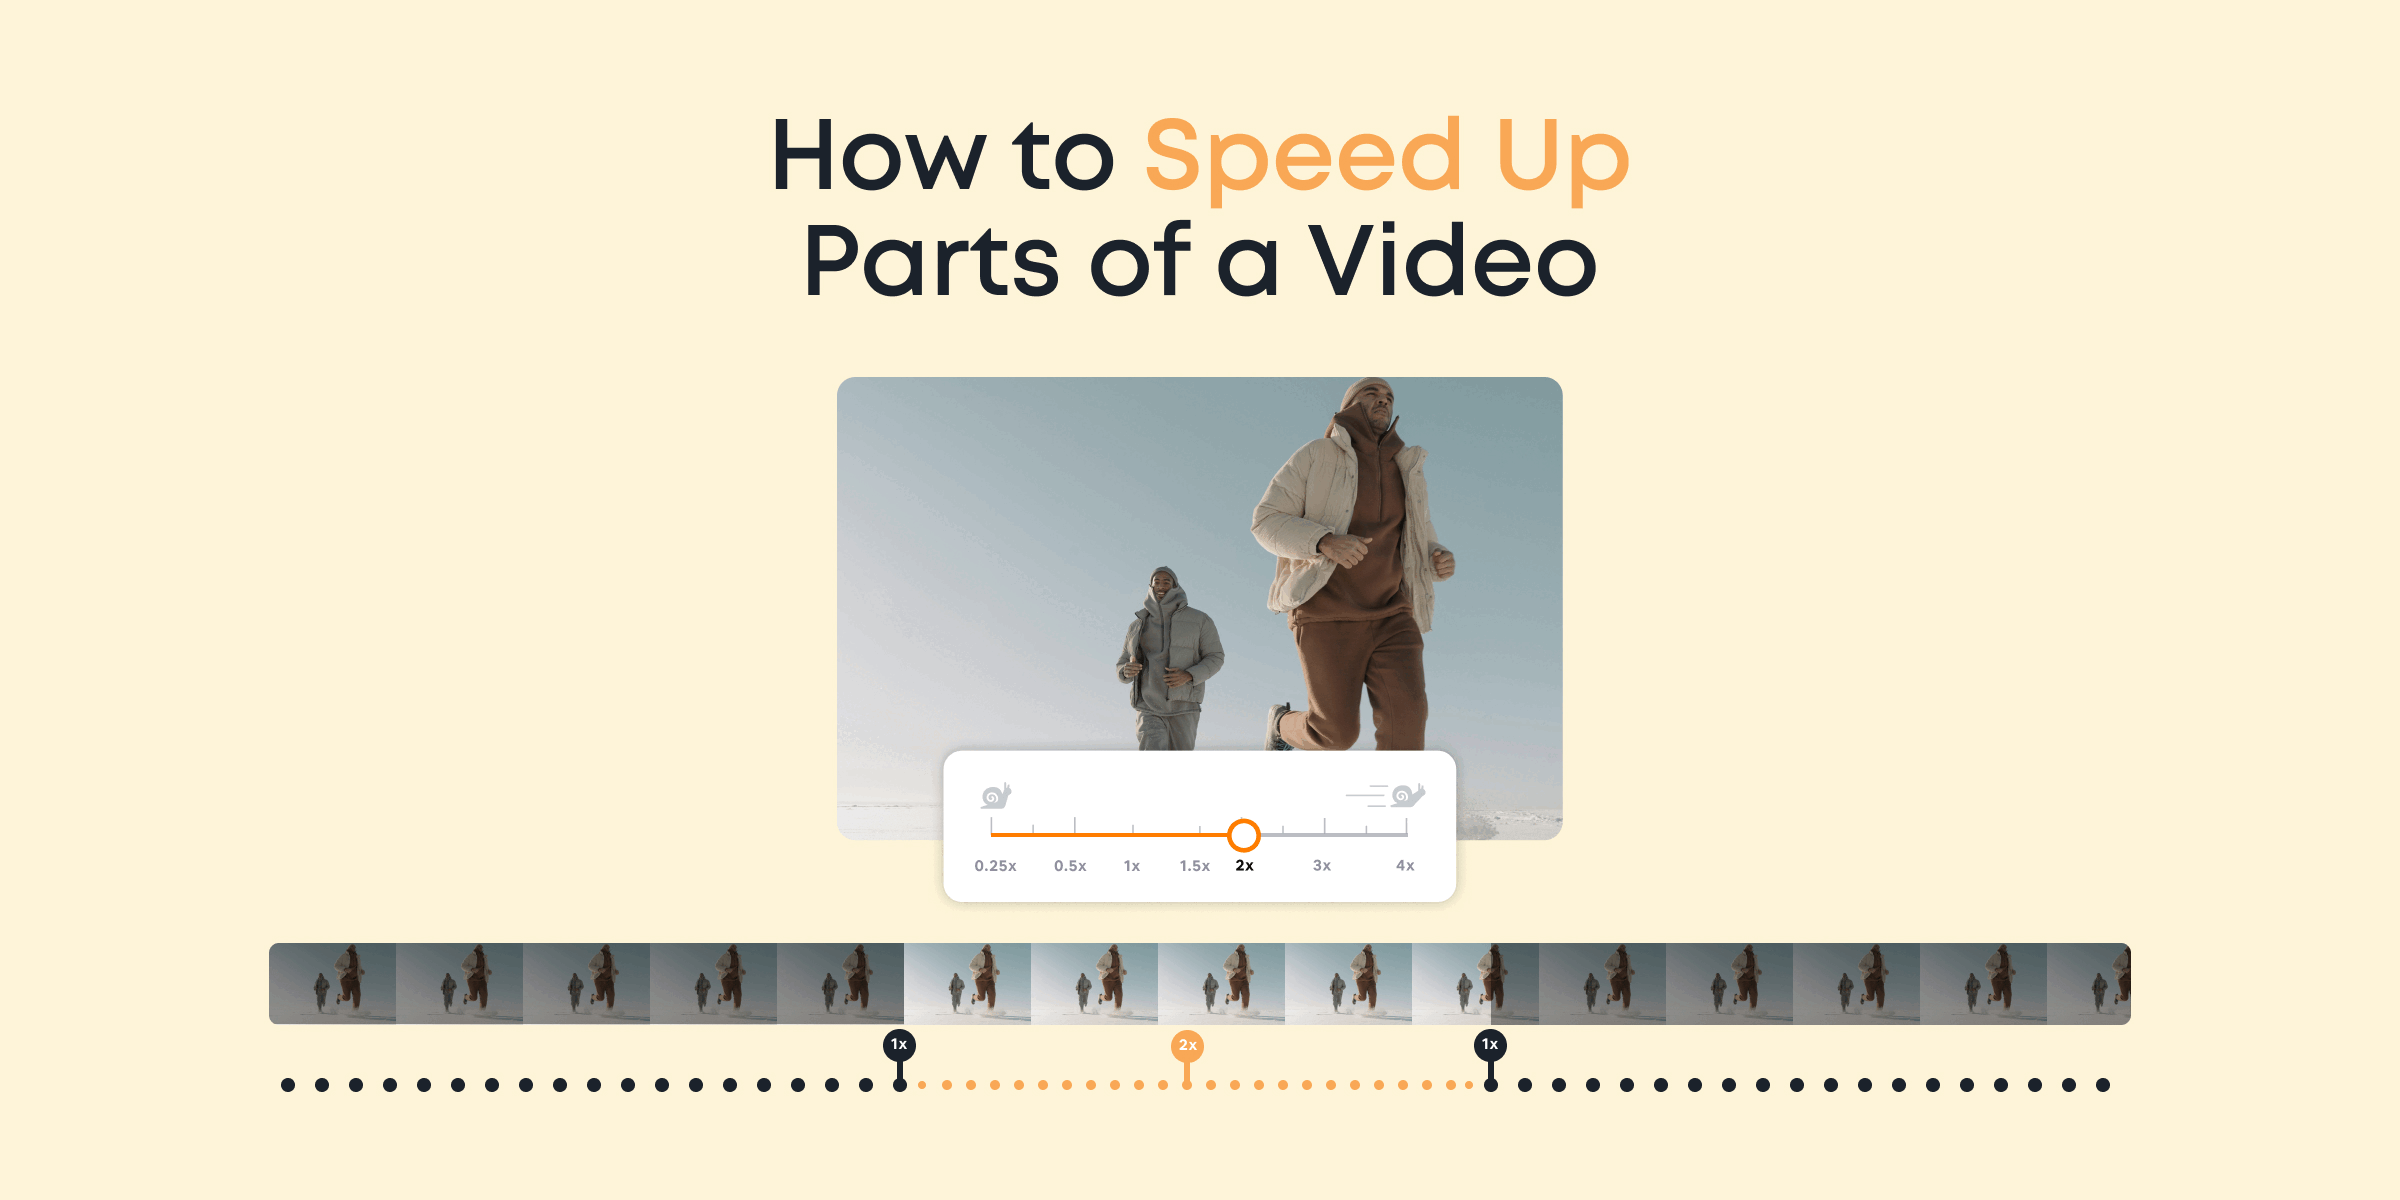 How to Speed Up Parts of a Video